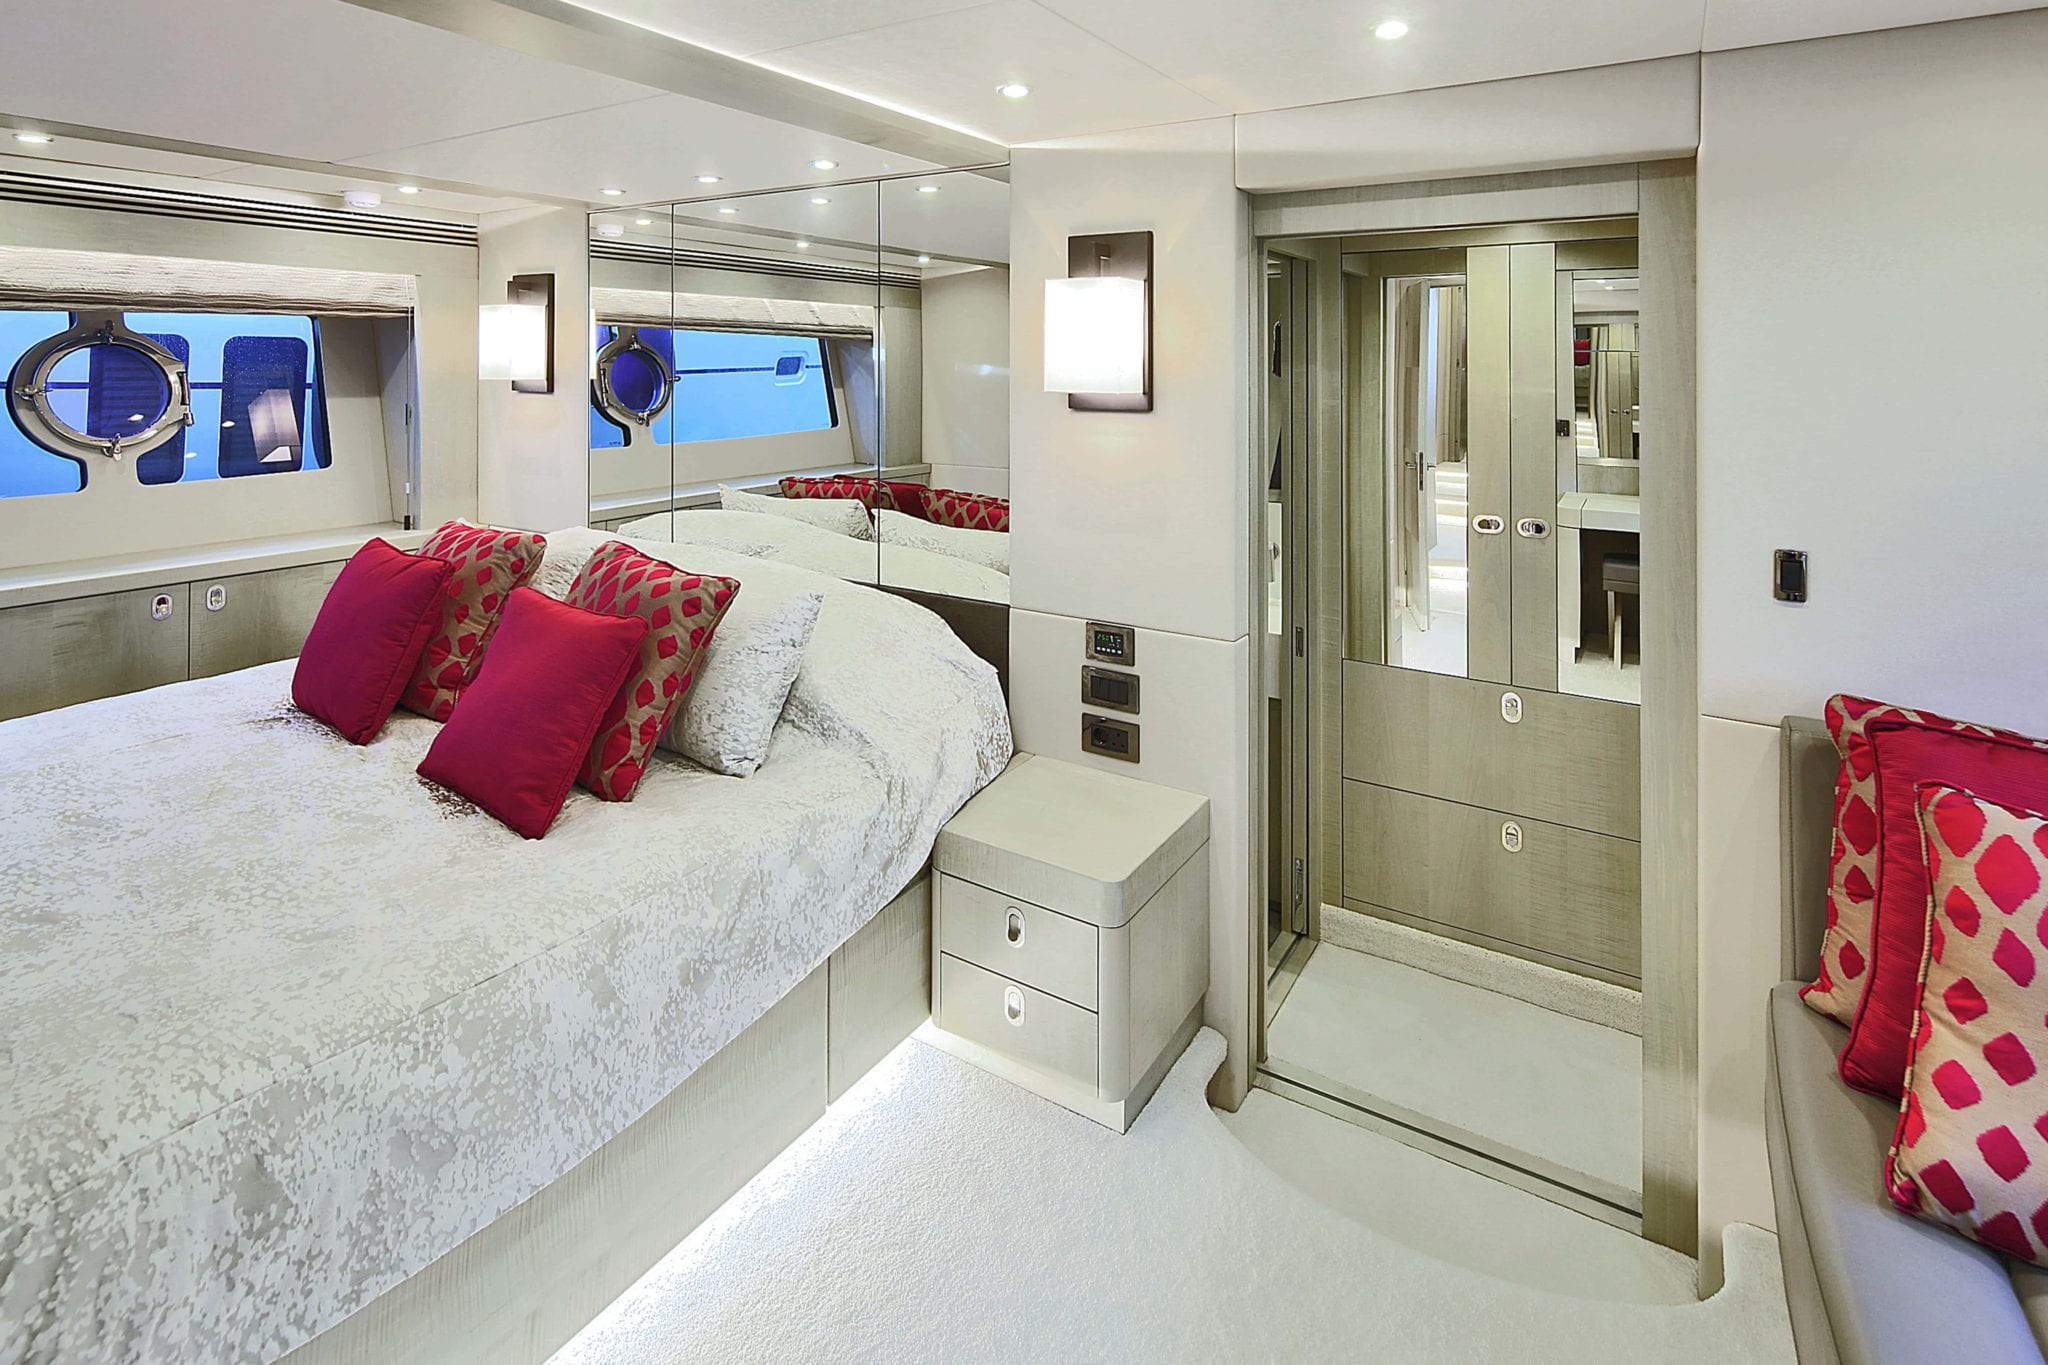 Explore the master bedroom here aboard the luxury sunseeker yacht.